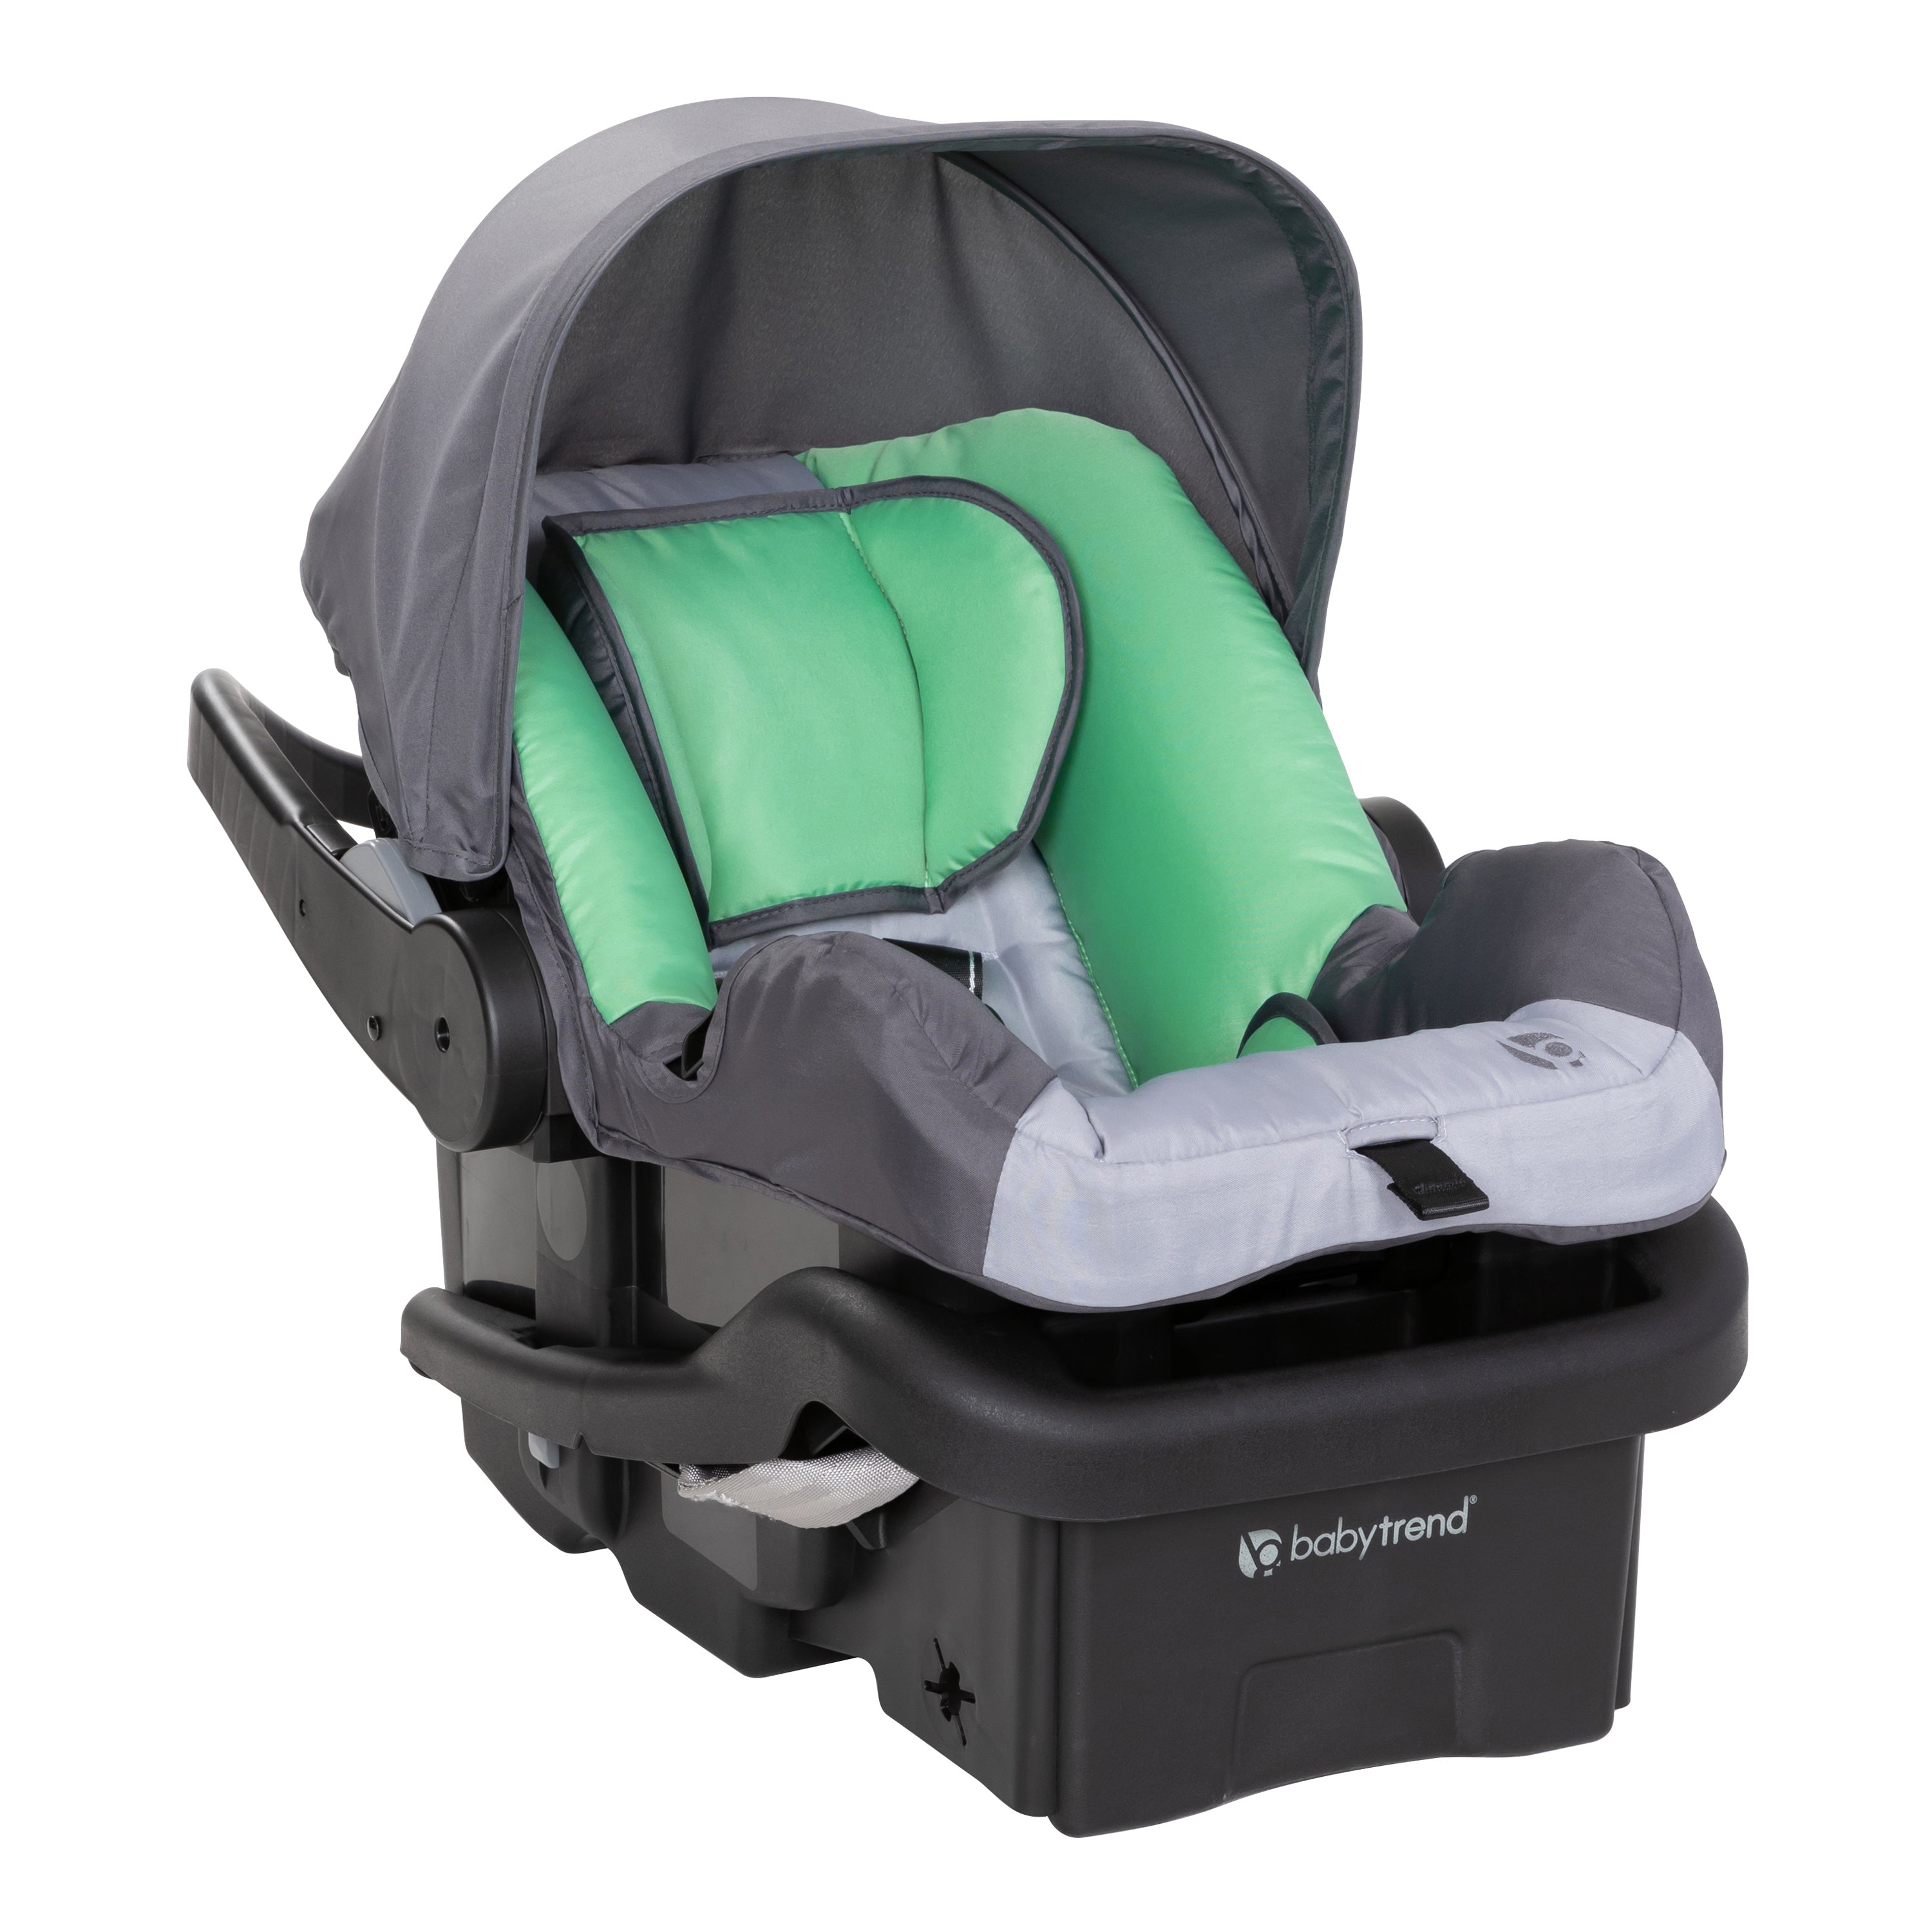 baby trend ez ride travel system manual